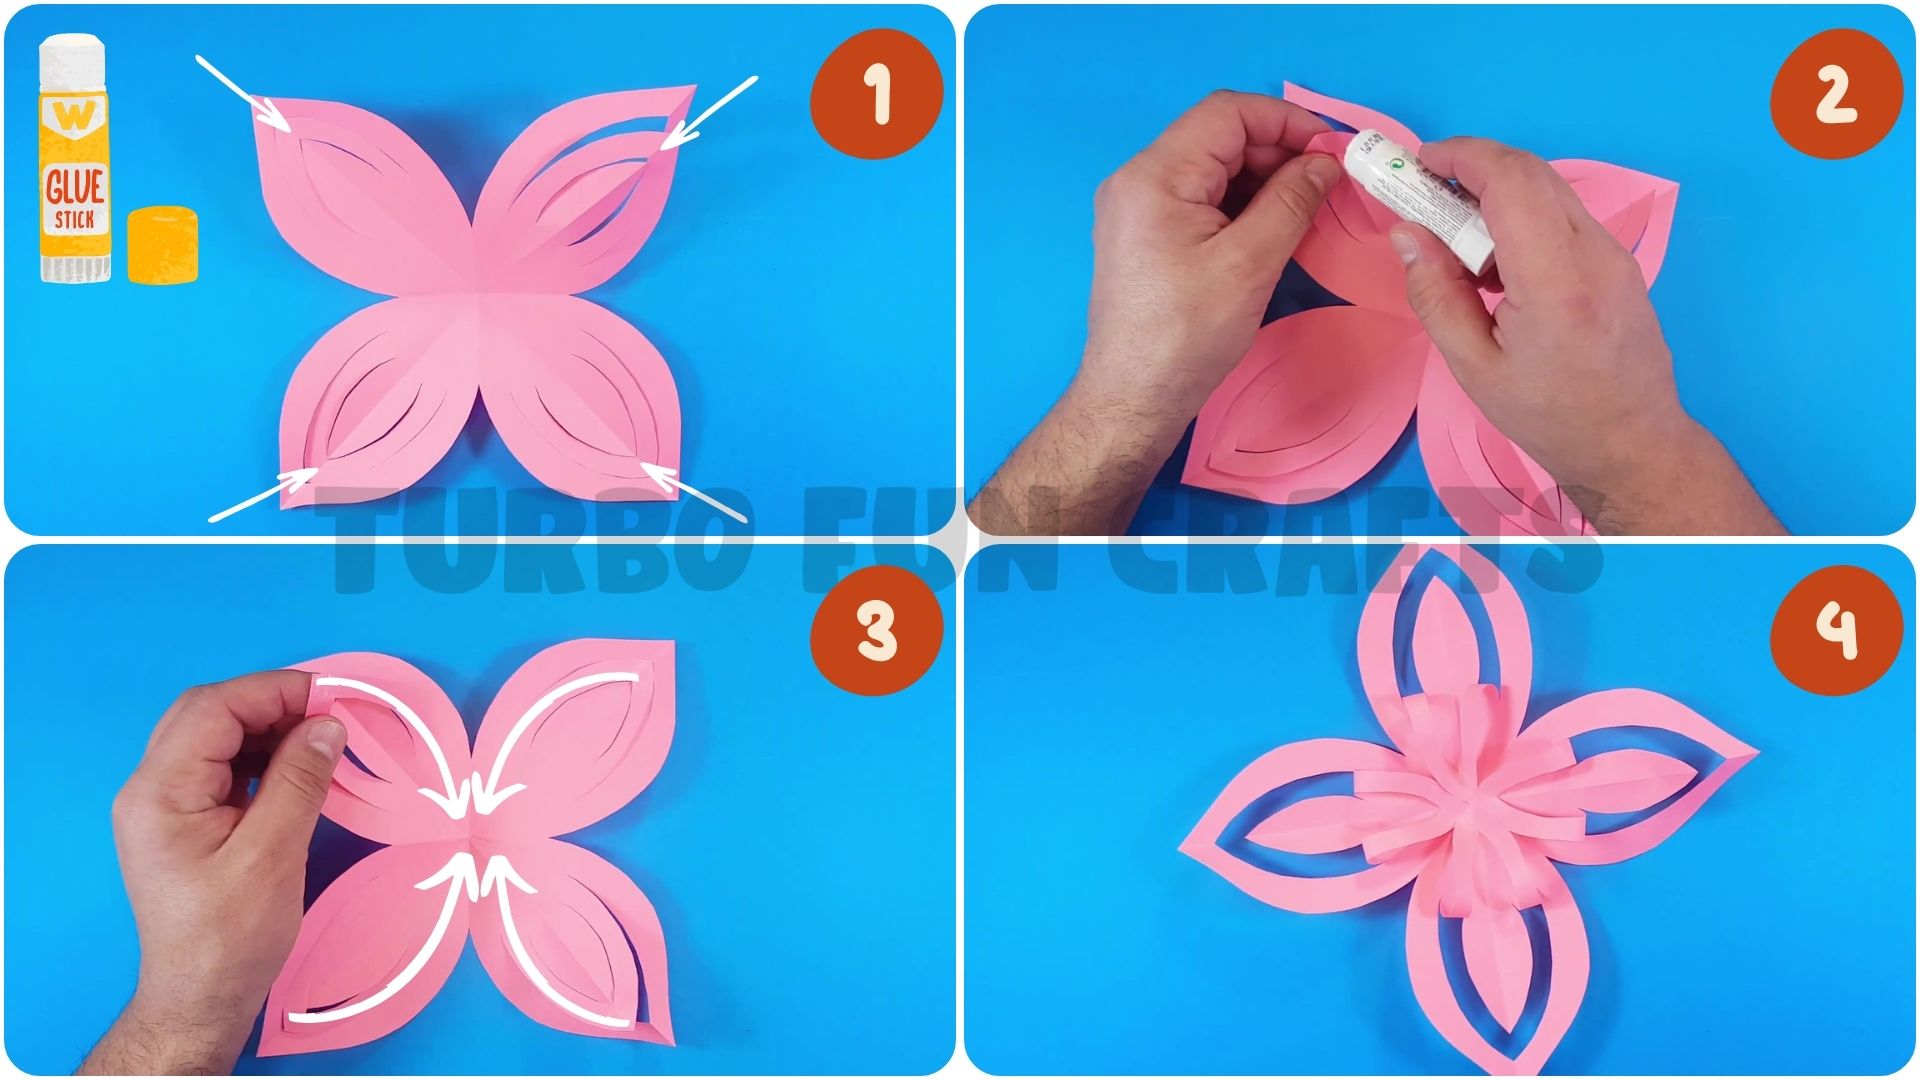 How To Make A 3d Paper Snowflake Tutorial Turbofuncrafts